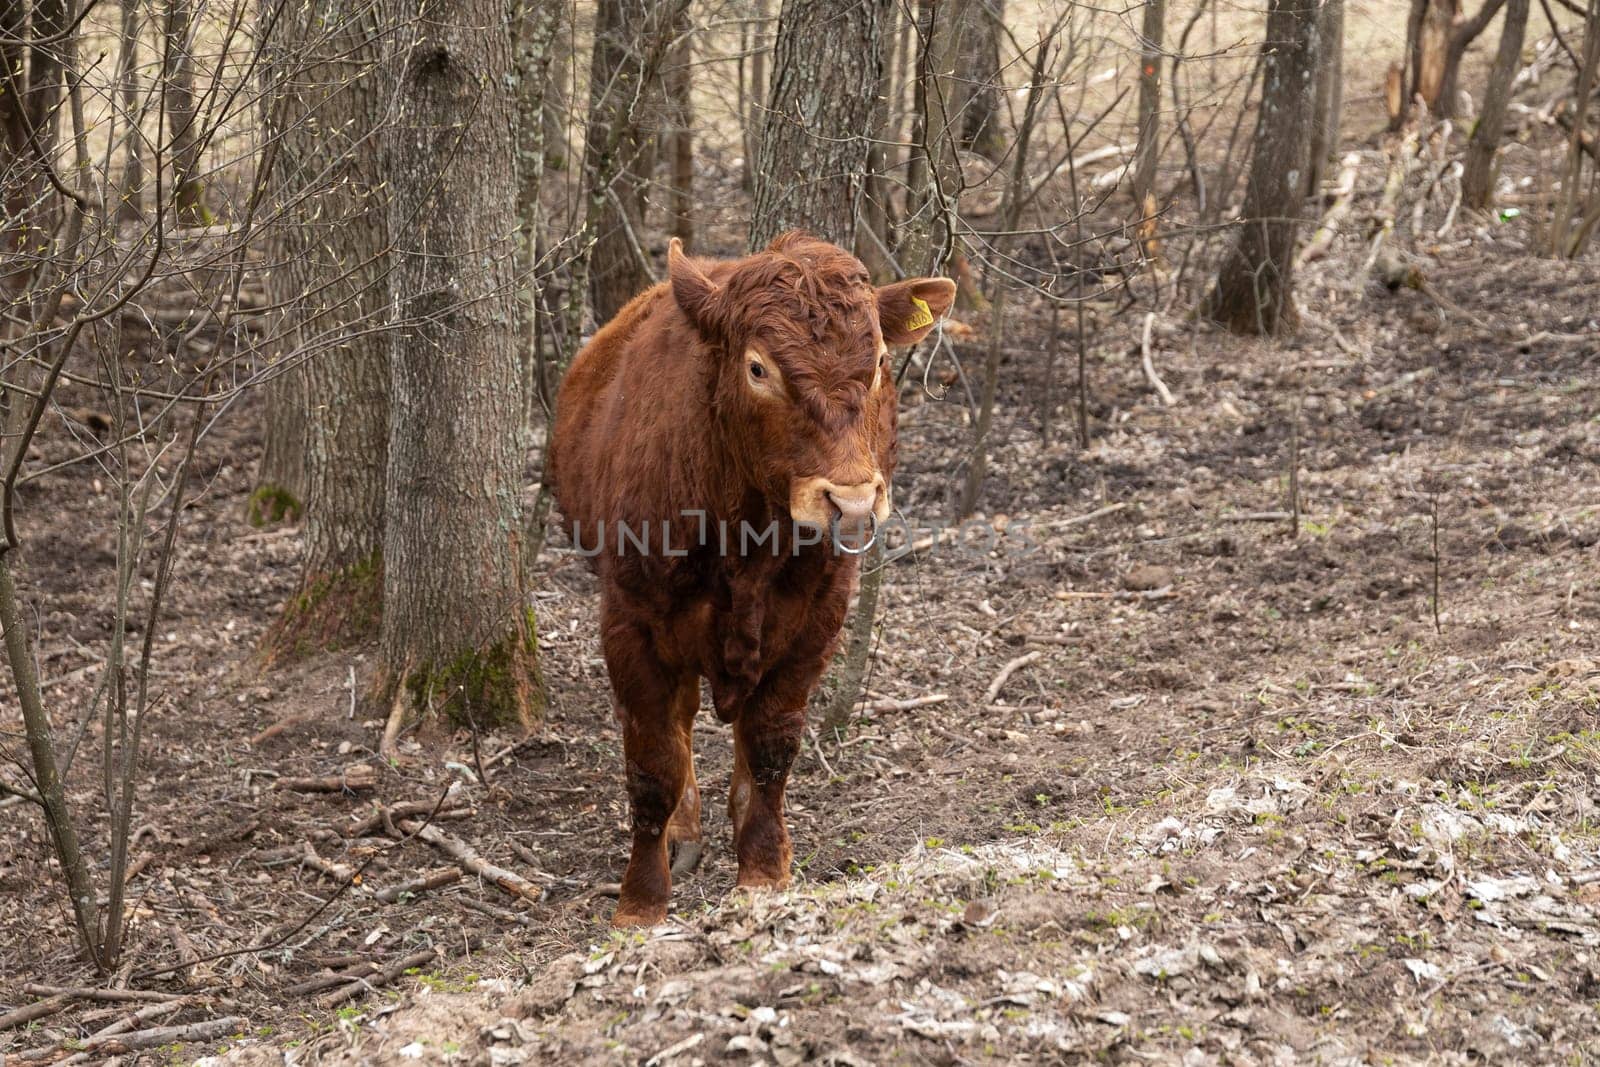 A brown cow is standing in the middle of a dense forest, surrounded by trees and foliage. The cow seems to be grazing on the grassy ground, with a curious expression on its face.